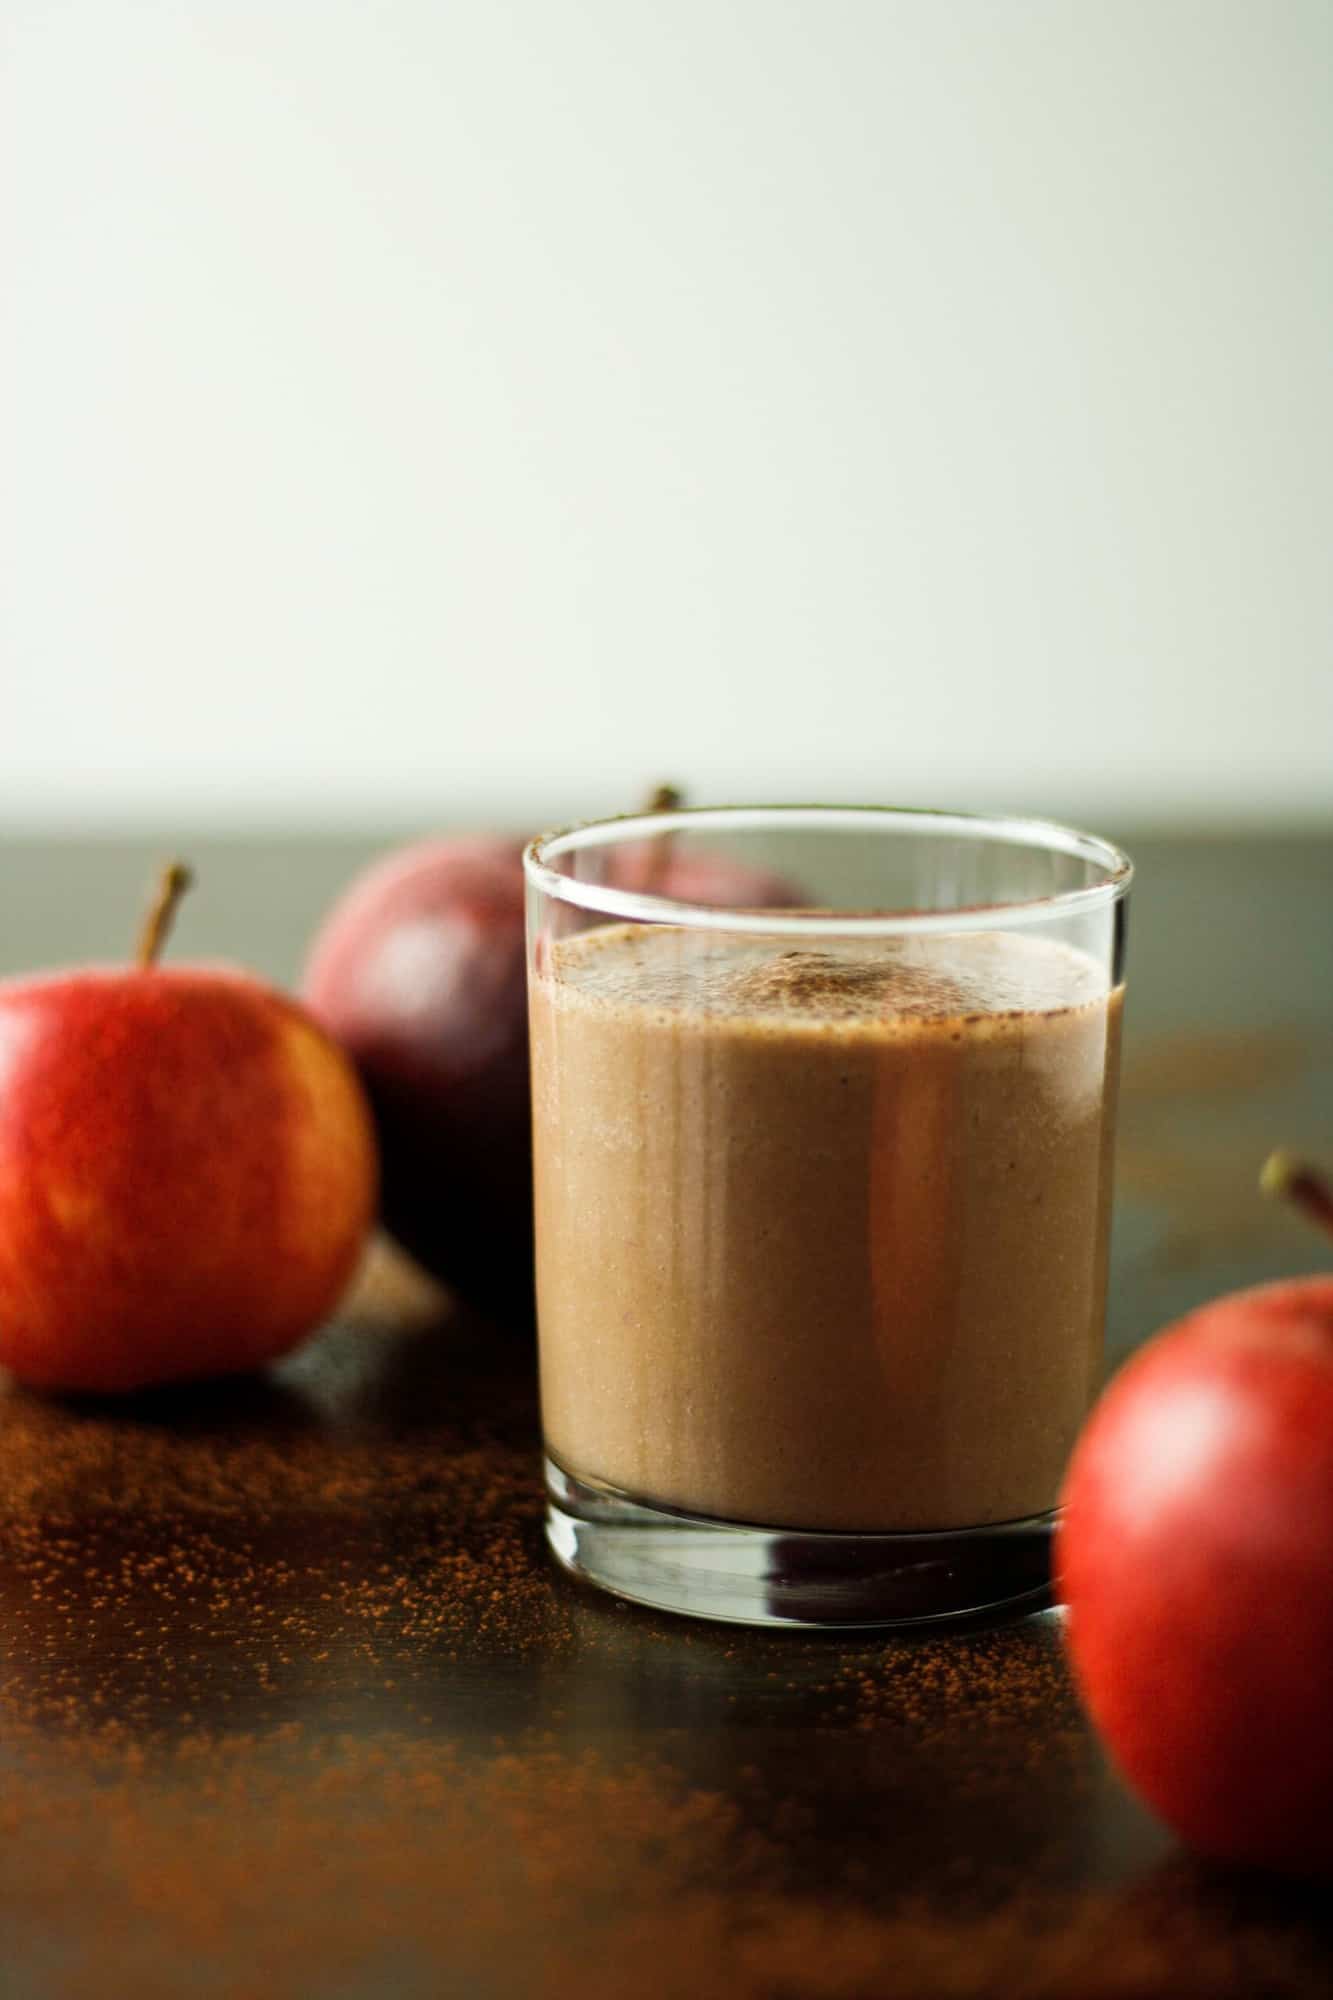 A glass of chocolate apple smoothie on a wooden table next to three apples.